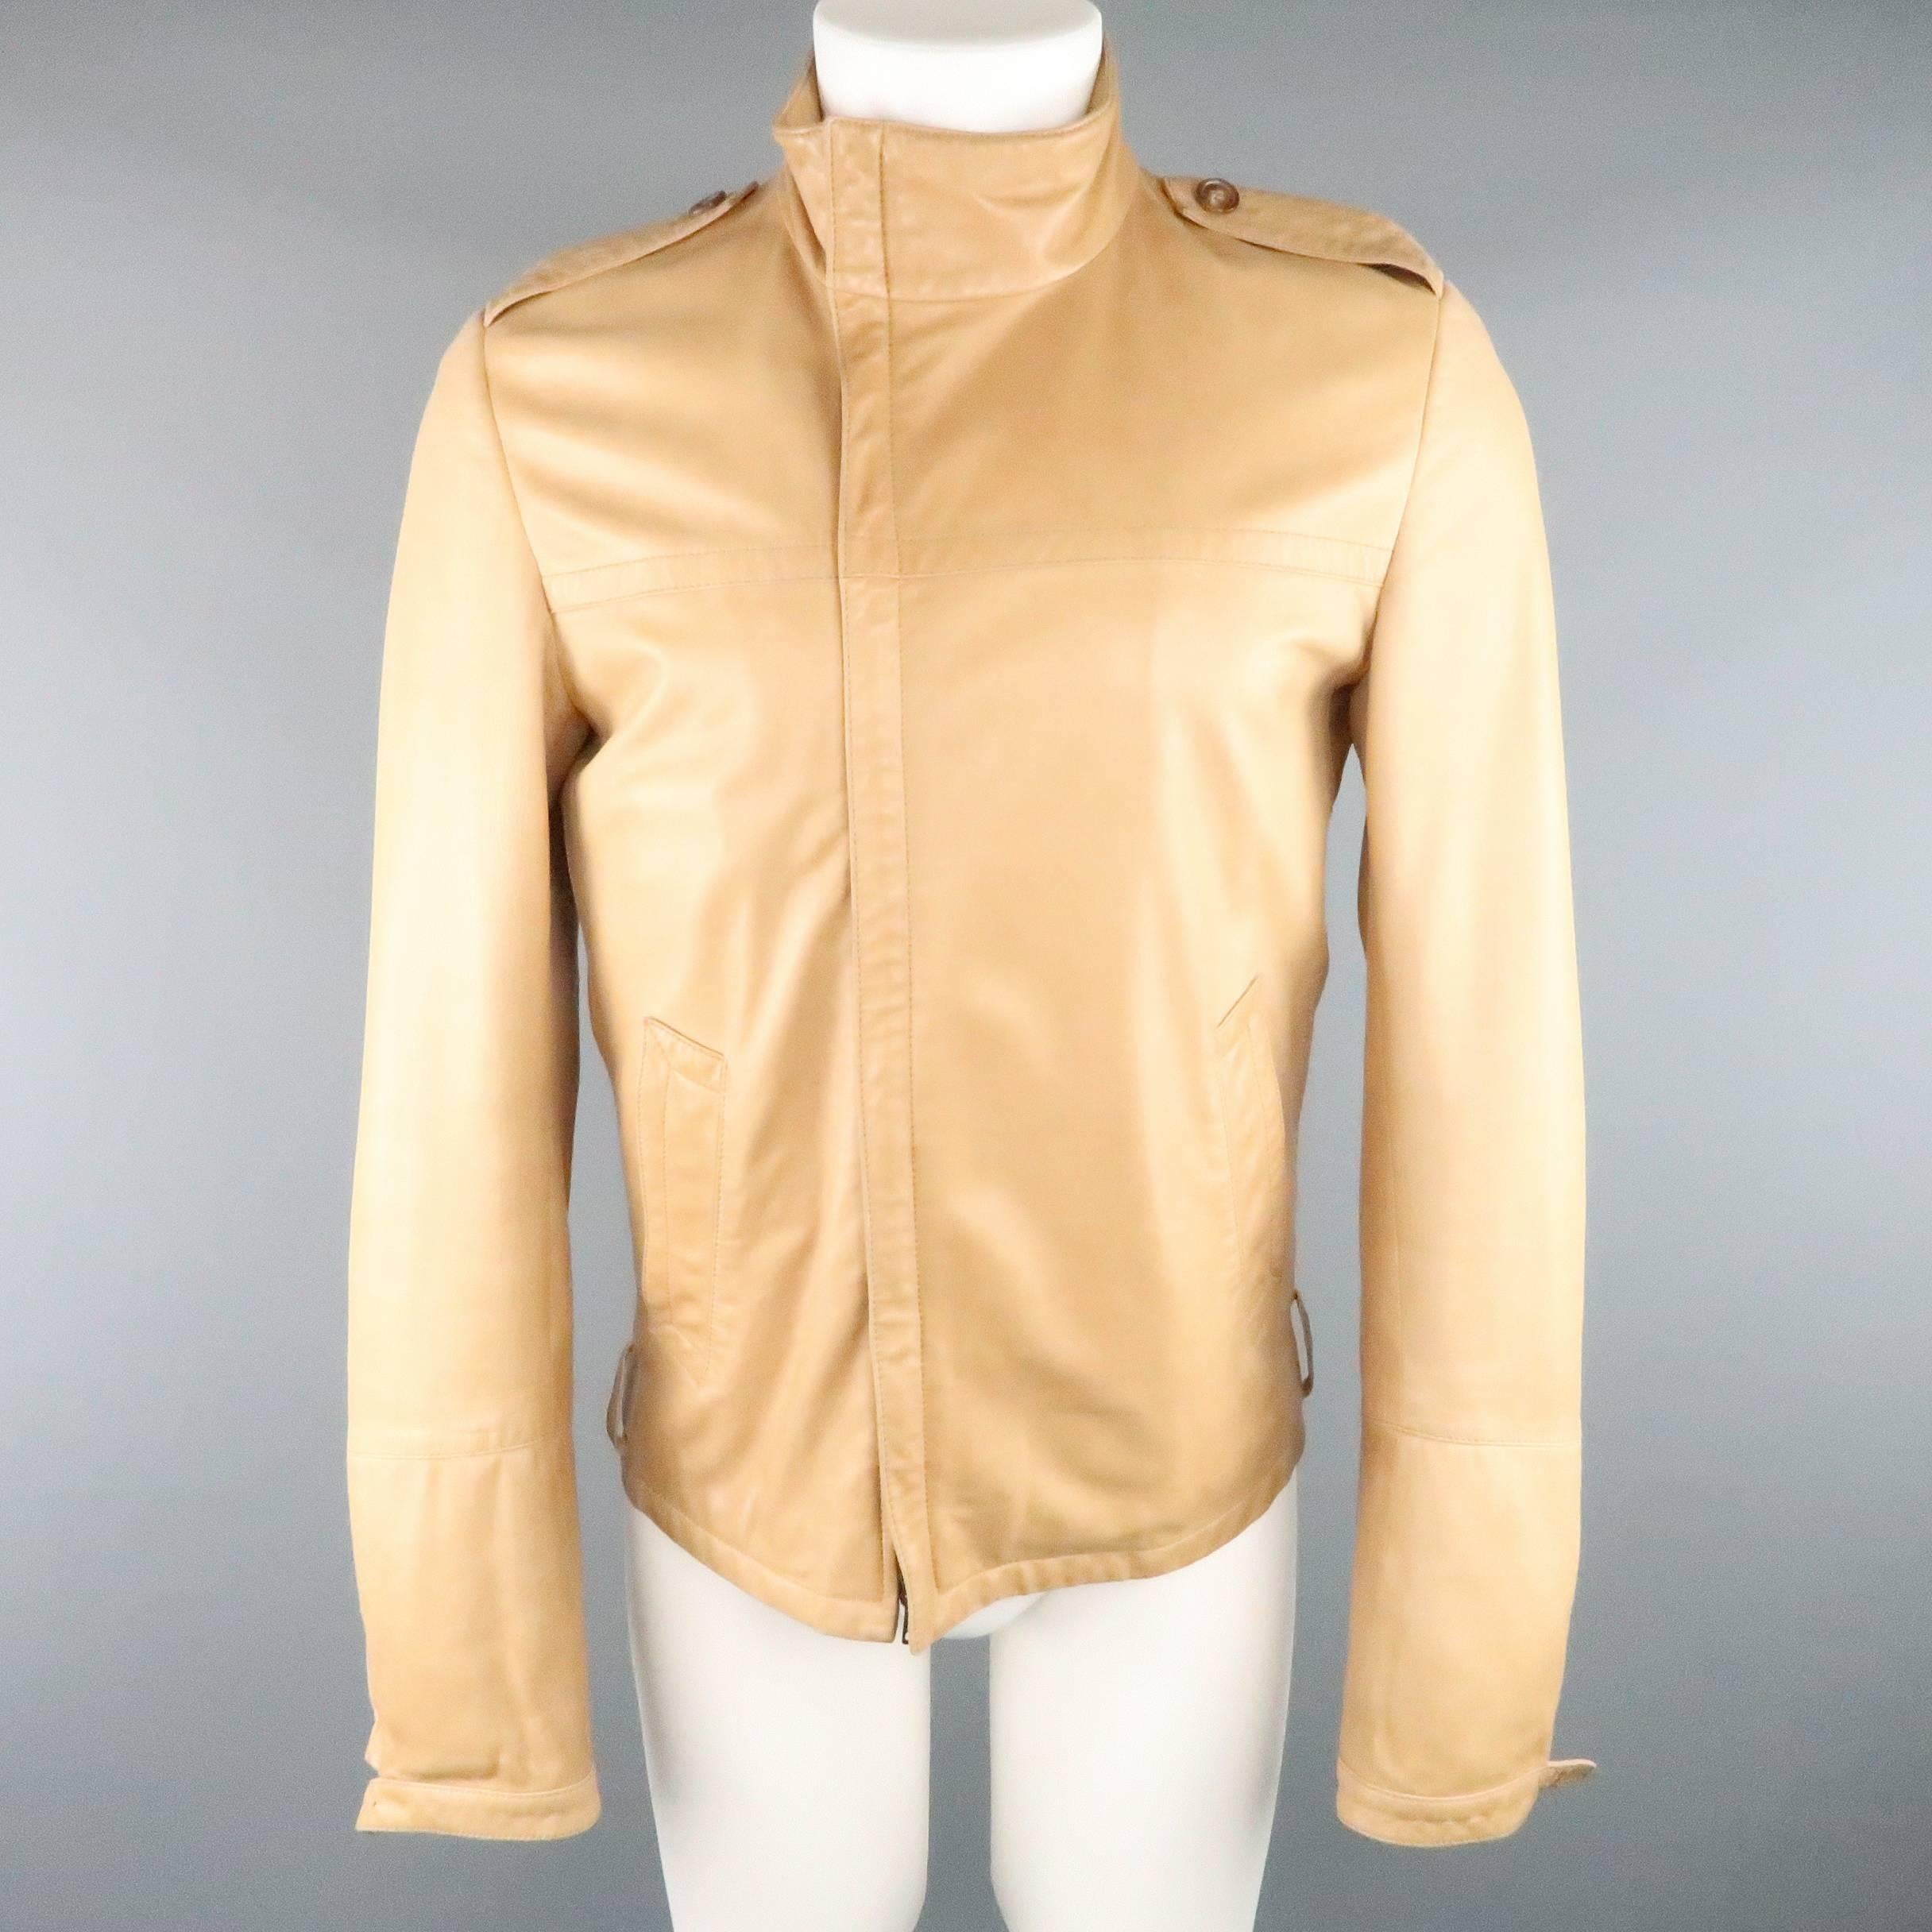 This GUCCI by TOM FORD circa 2000 jacket comes in a butter soft light tan leather and features an asymmetrical zip high collar, epaulets, slanted pockets, and tab cuff sleeves. Minor wear and missing belt and cuff hardware. As-Is. Made in Italy.
